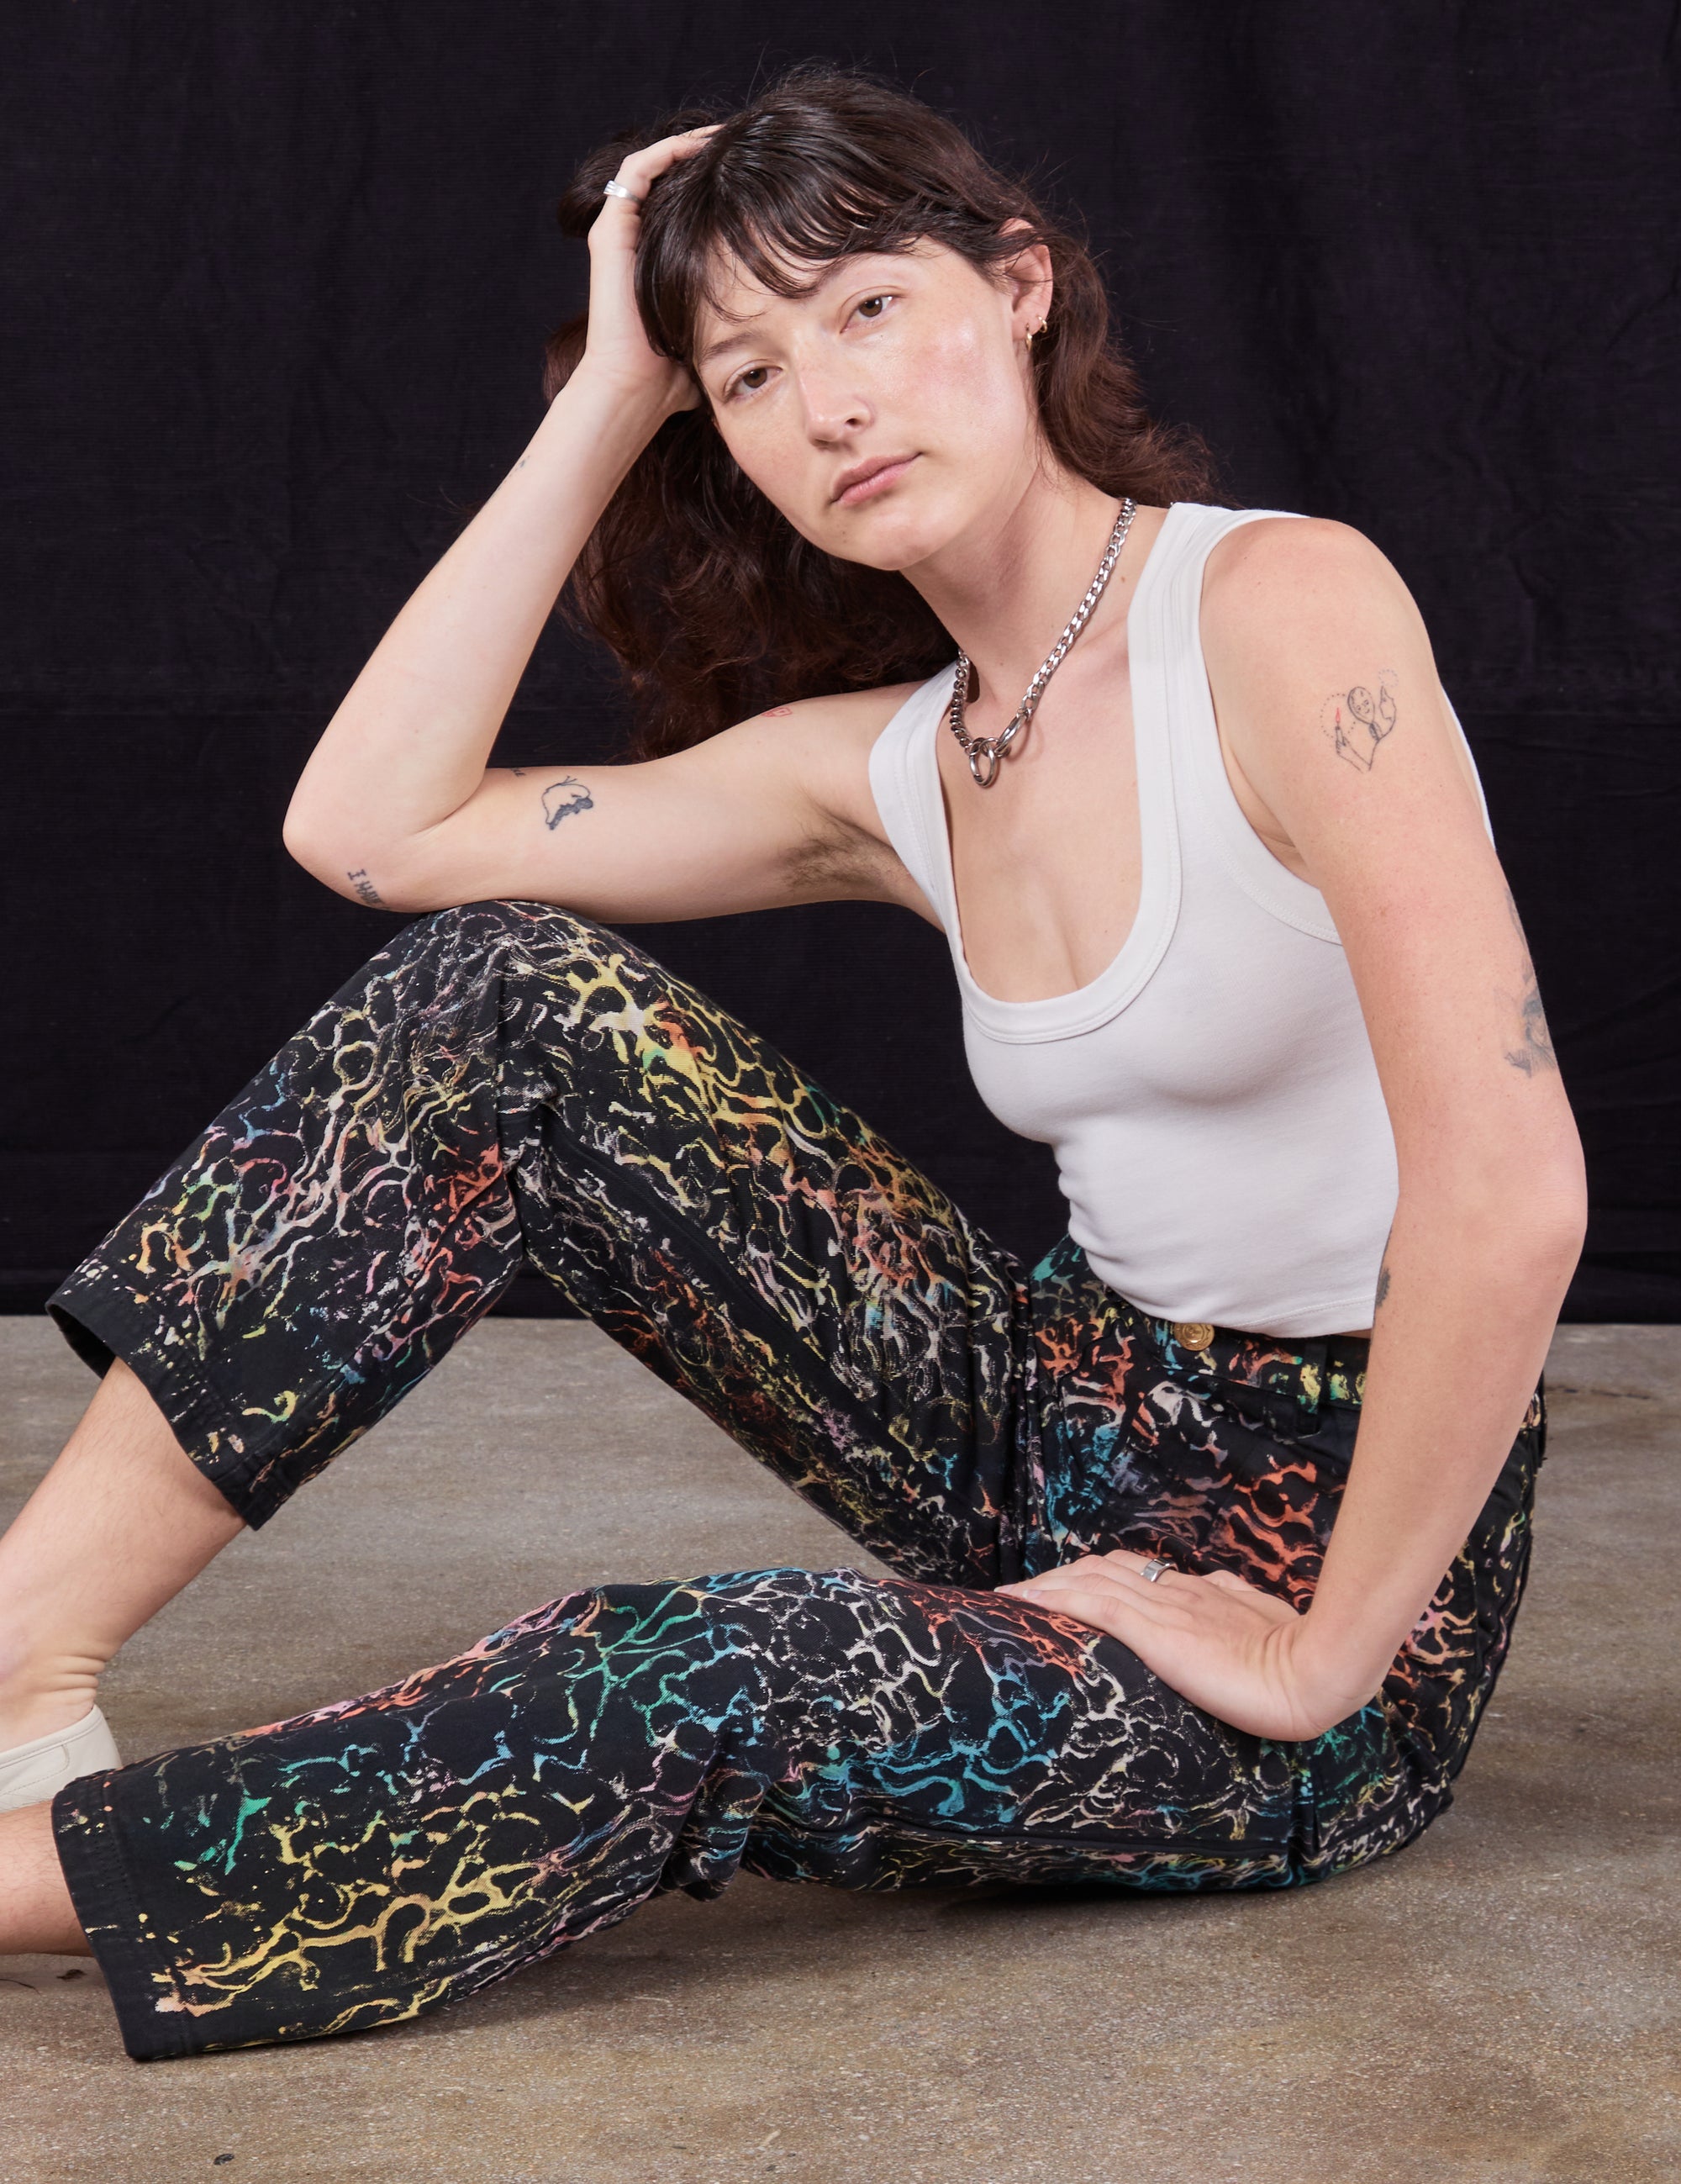 Alex is wearing Wavy Dye Work Pants paired with vintage off-white Cropped Tank Top